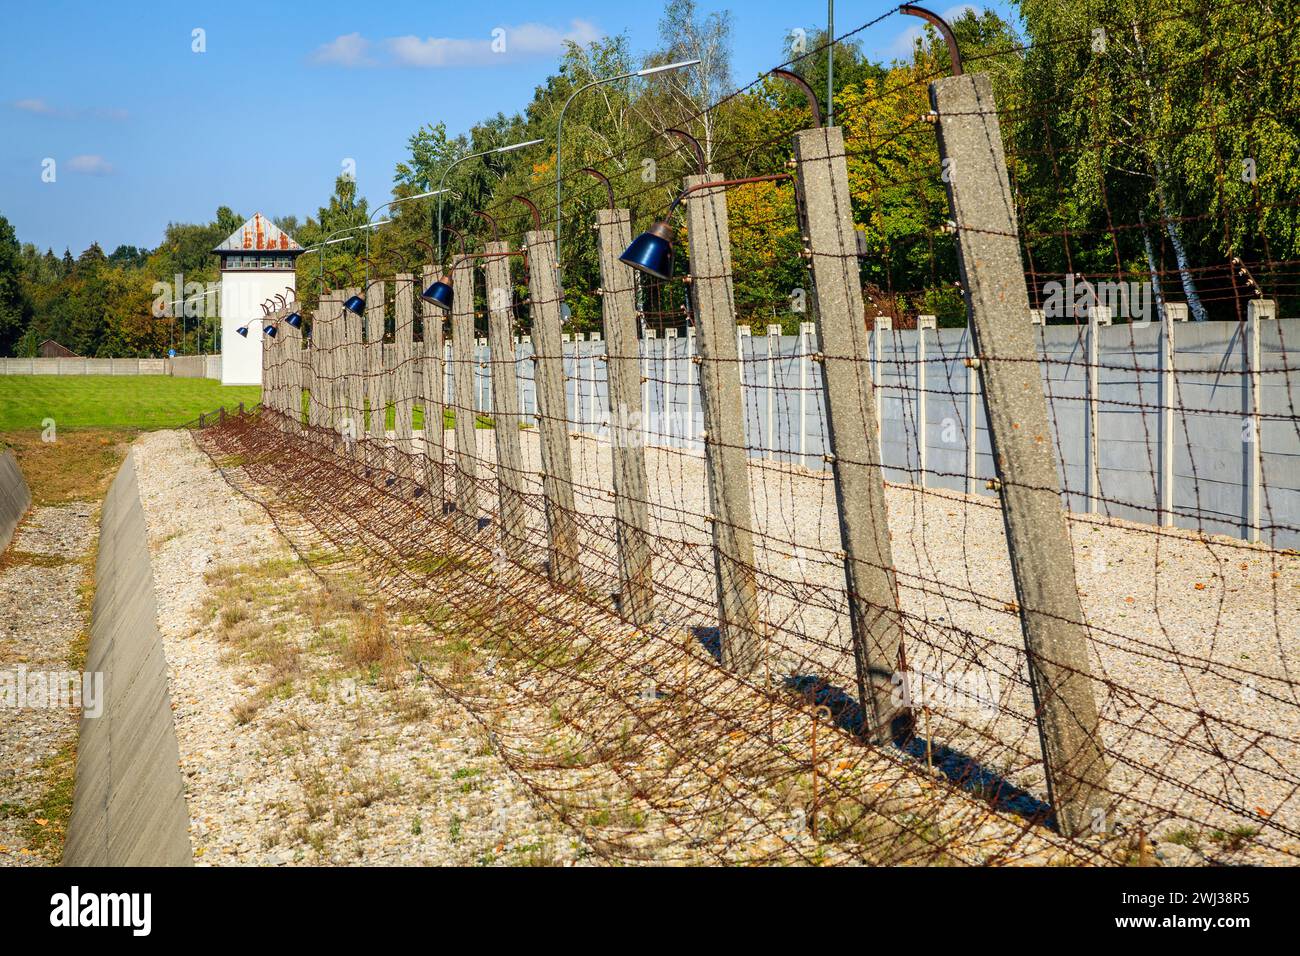 Dachau, Germany, September 30, 2015: Perimeter fence with electrified barbed wire at Dachau Concentration Camp in Germany Stock Photo